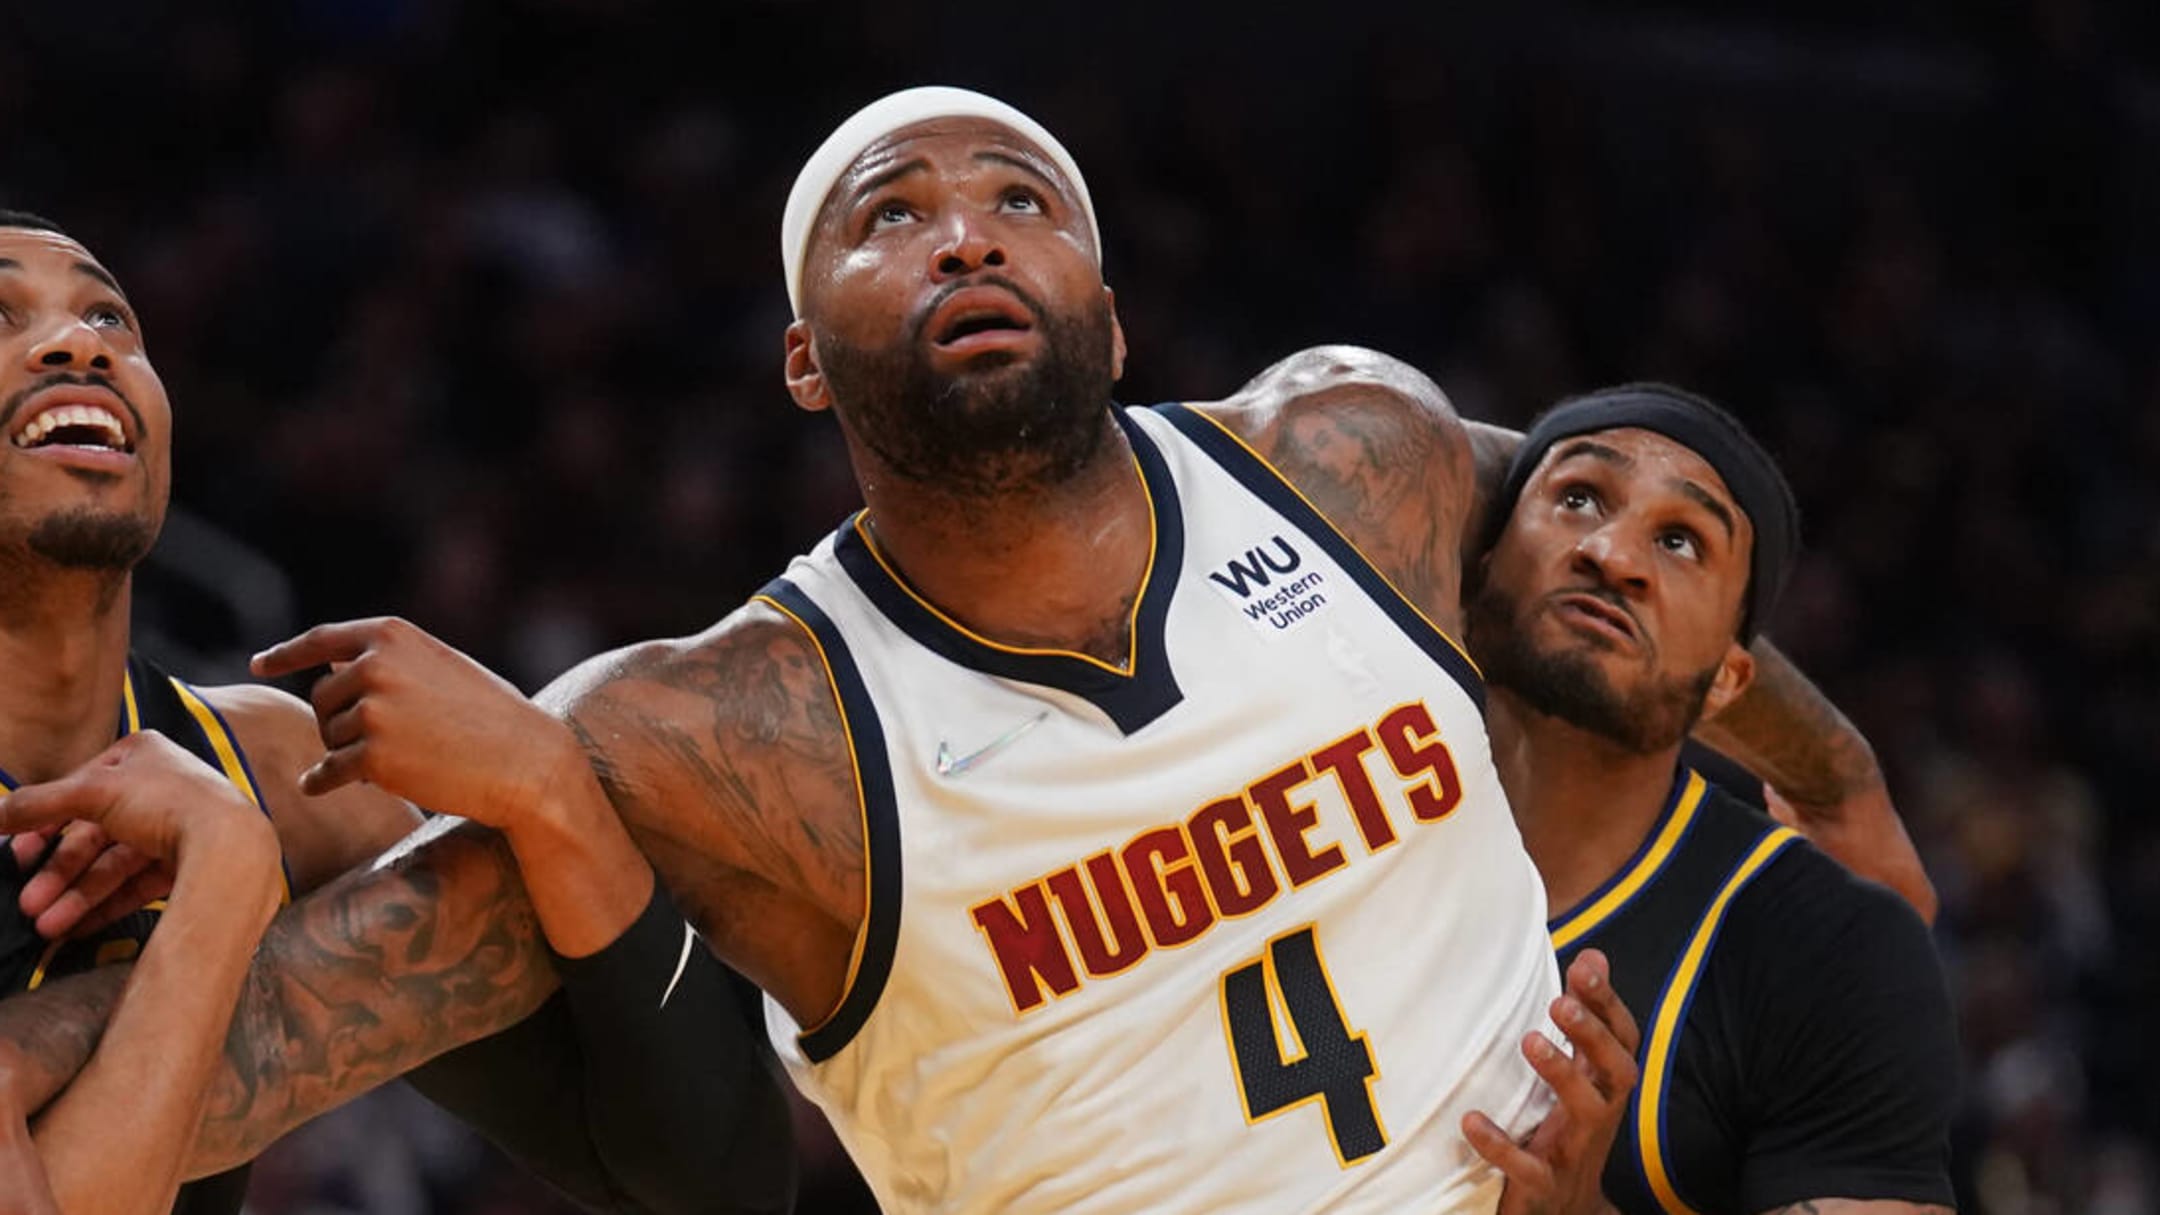 DeMarcus Cousins takes another shot at longtime enemy Chris Paul